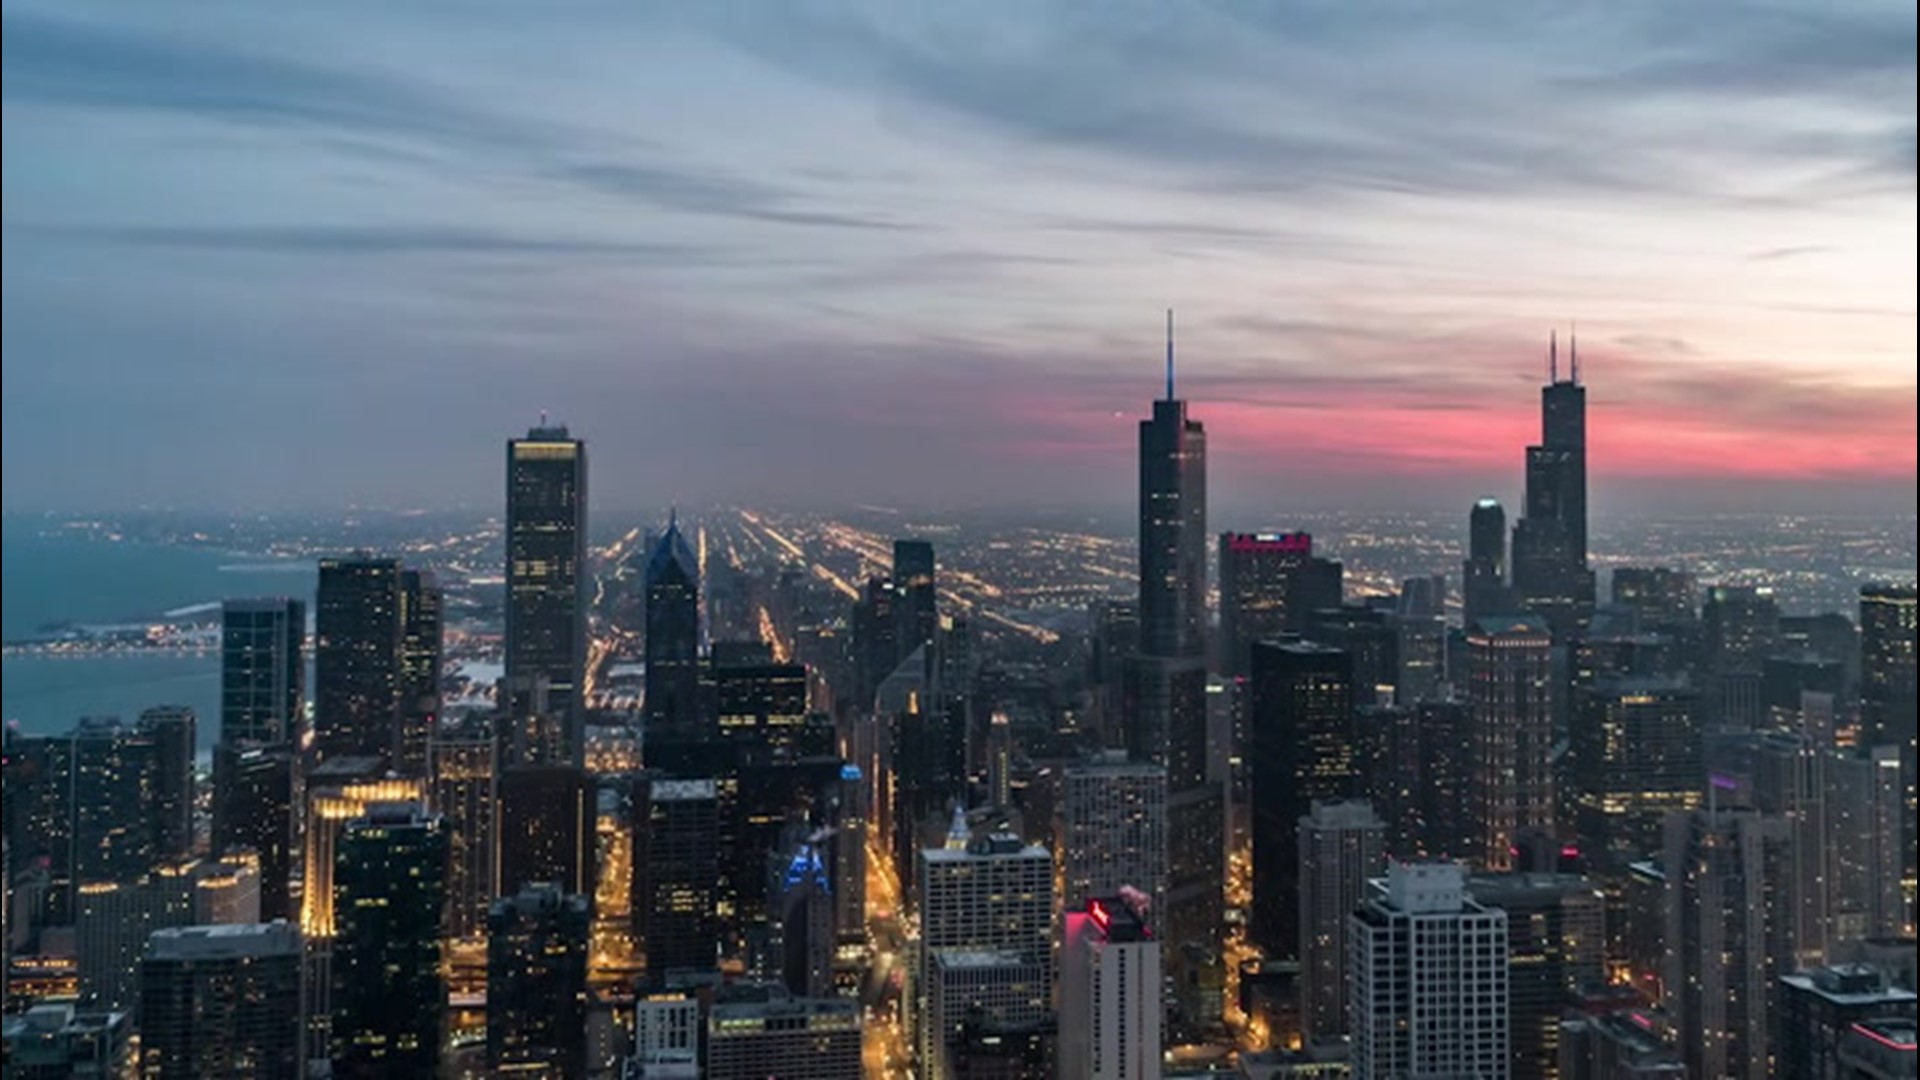 Chicago, Illinois, may be known as the Windy City, but that doesn't mean it's windy. Here's the real story behind Chicago's famous nickname.